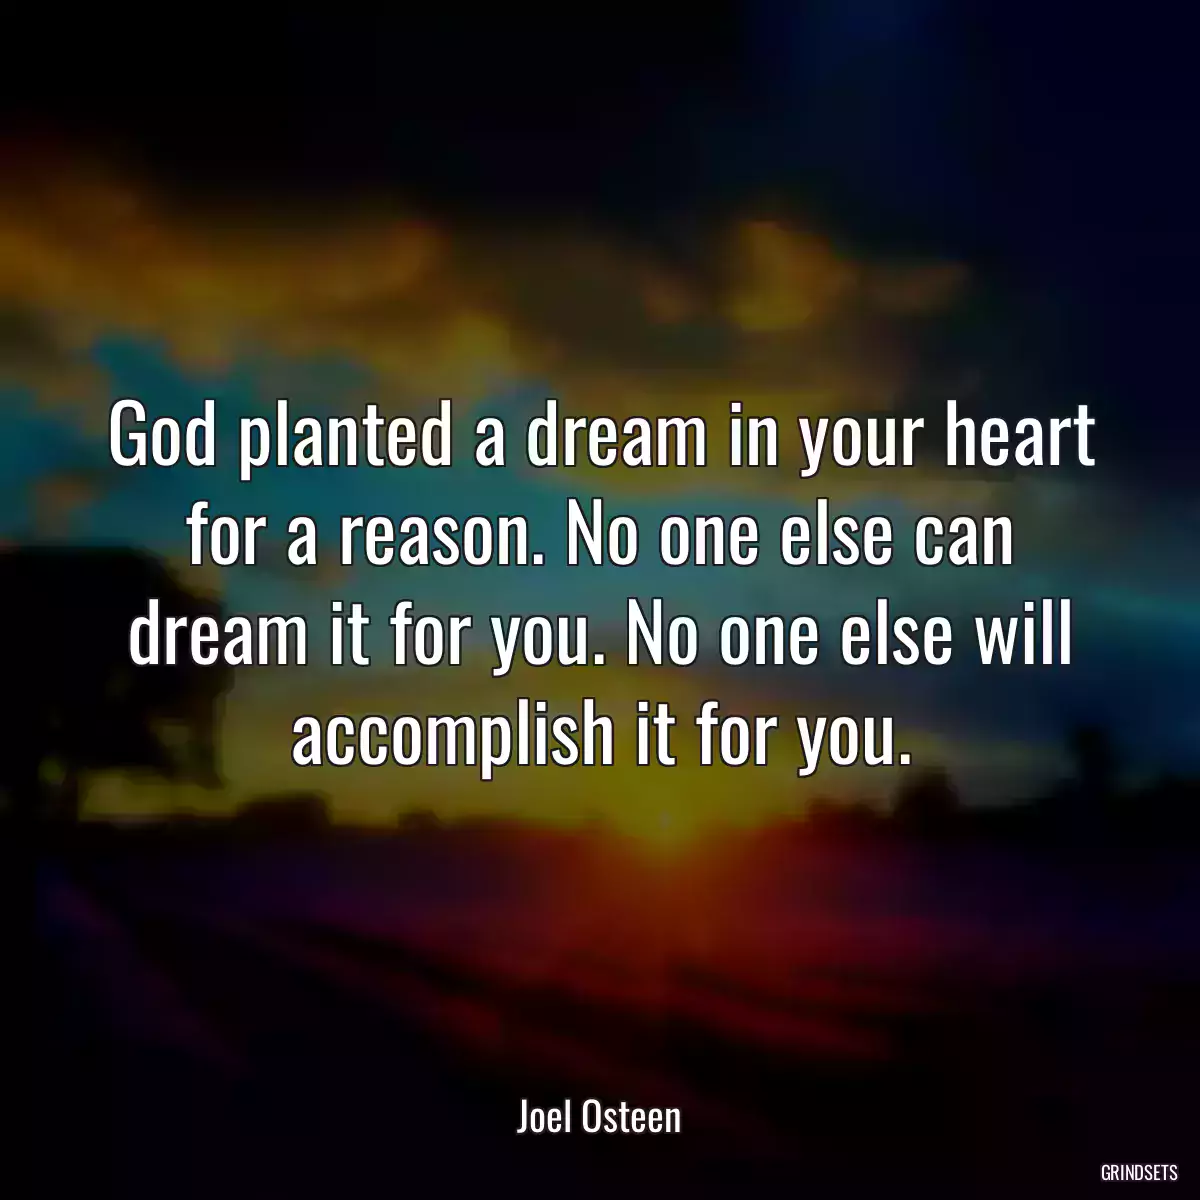 God planted a dream in your heart for a reason. No one else can dream it for you. No one else will accomplish it for you.